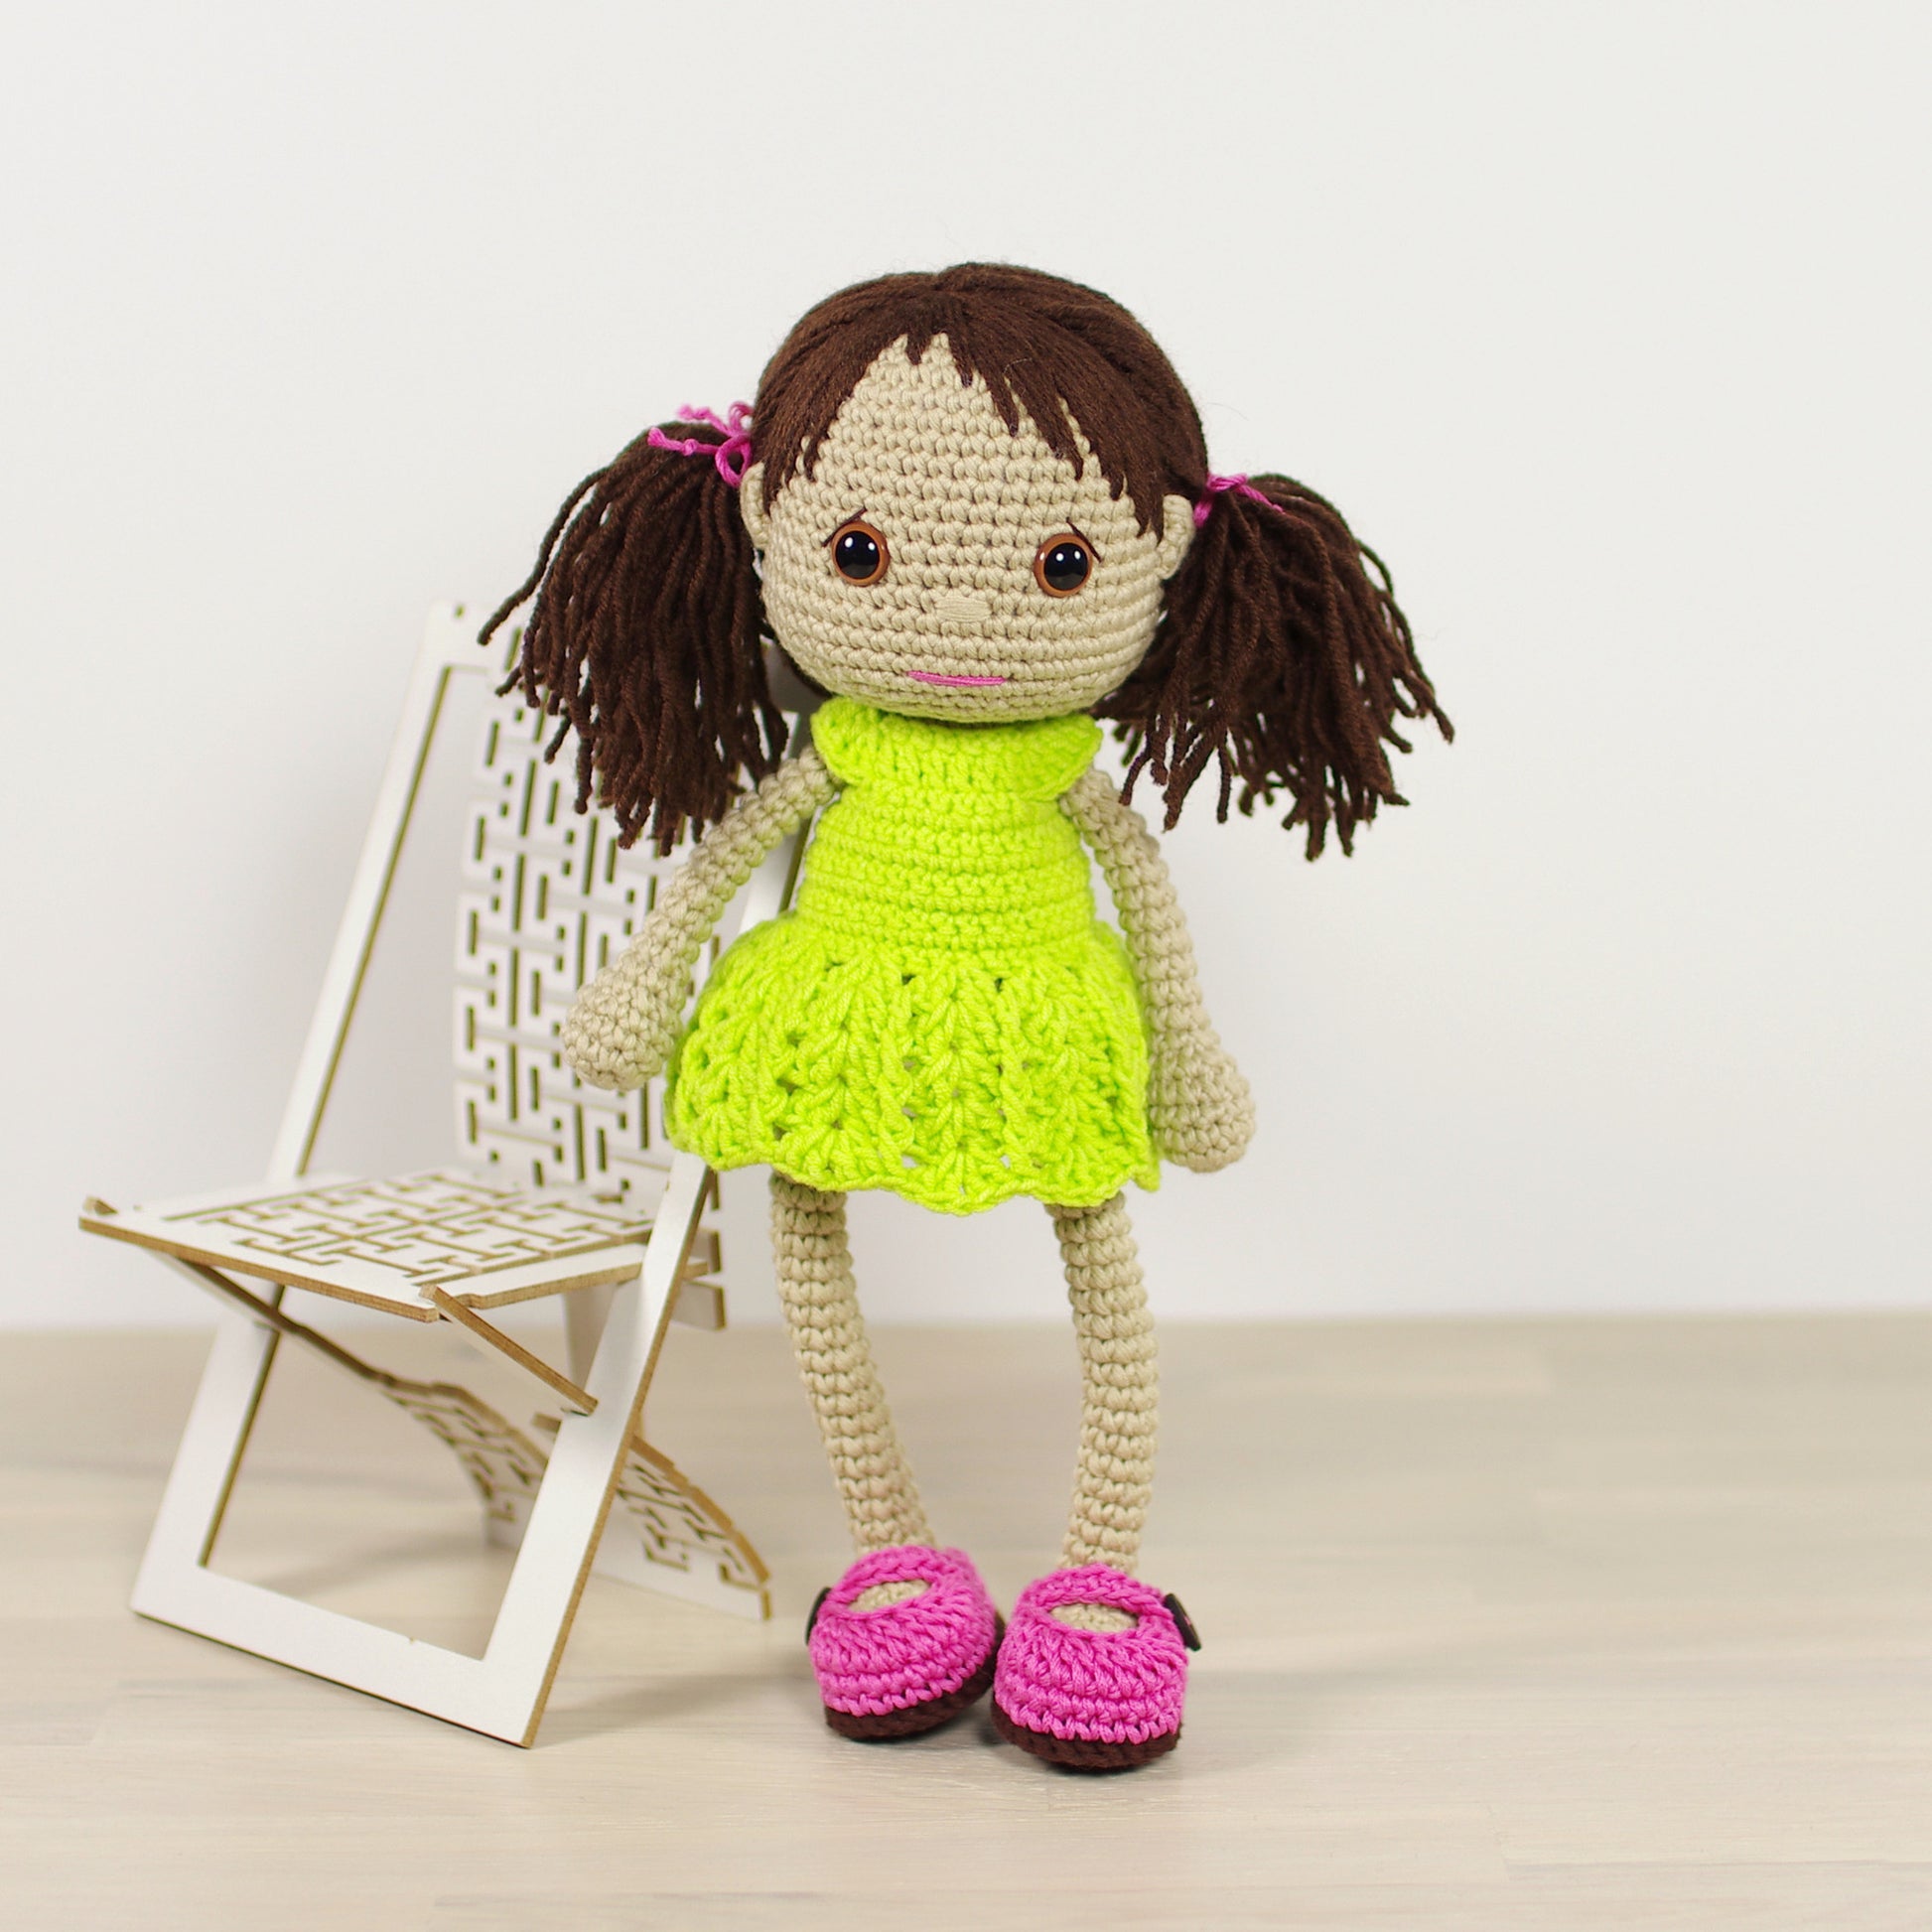 Crochet doll with dress and shoes